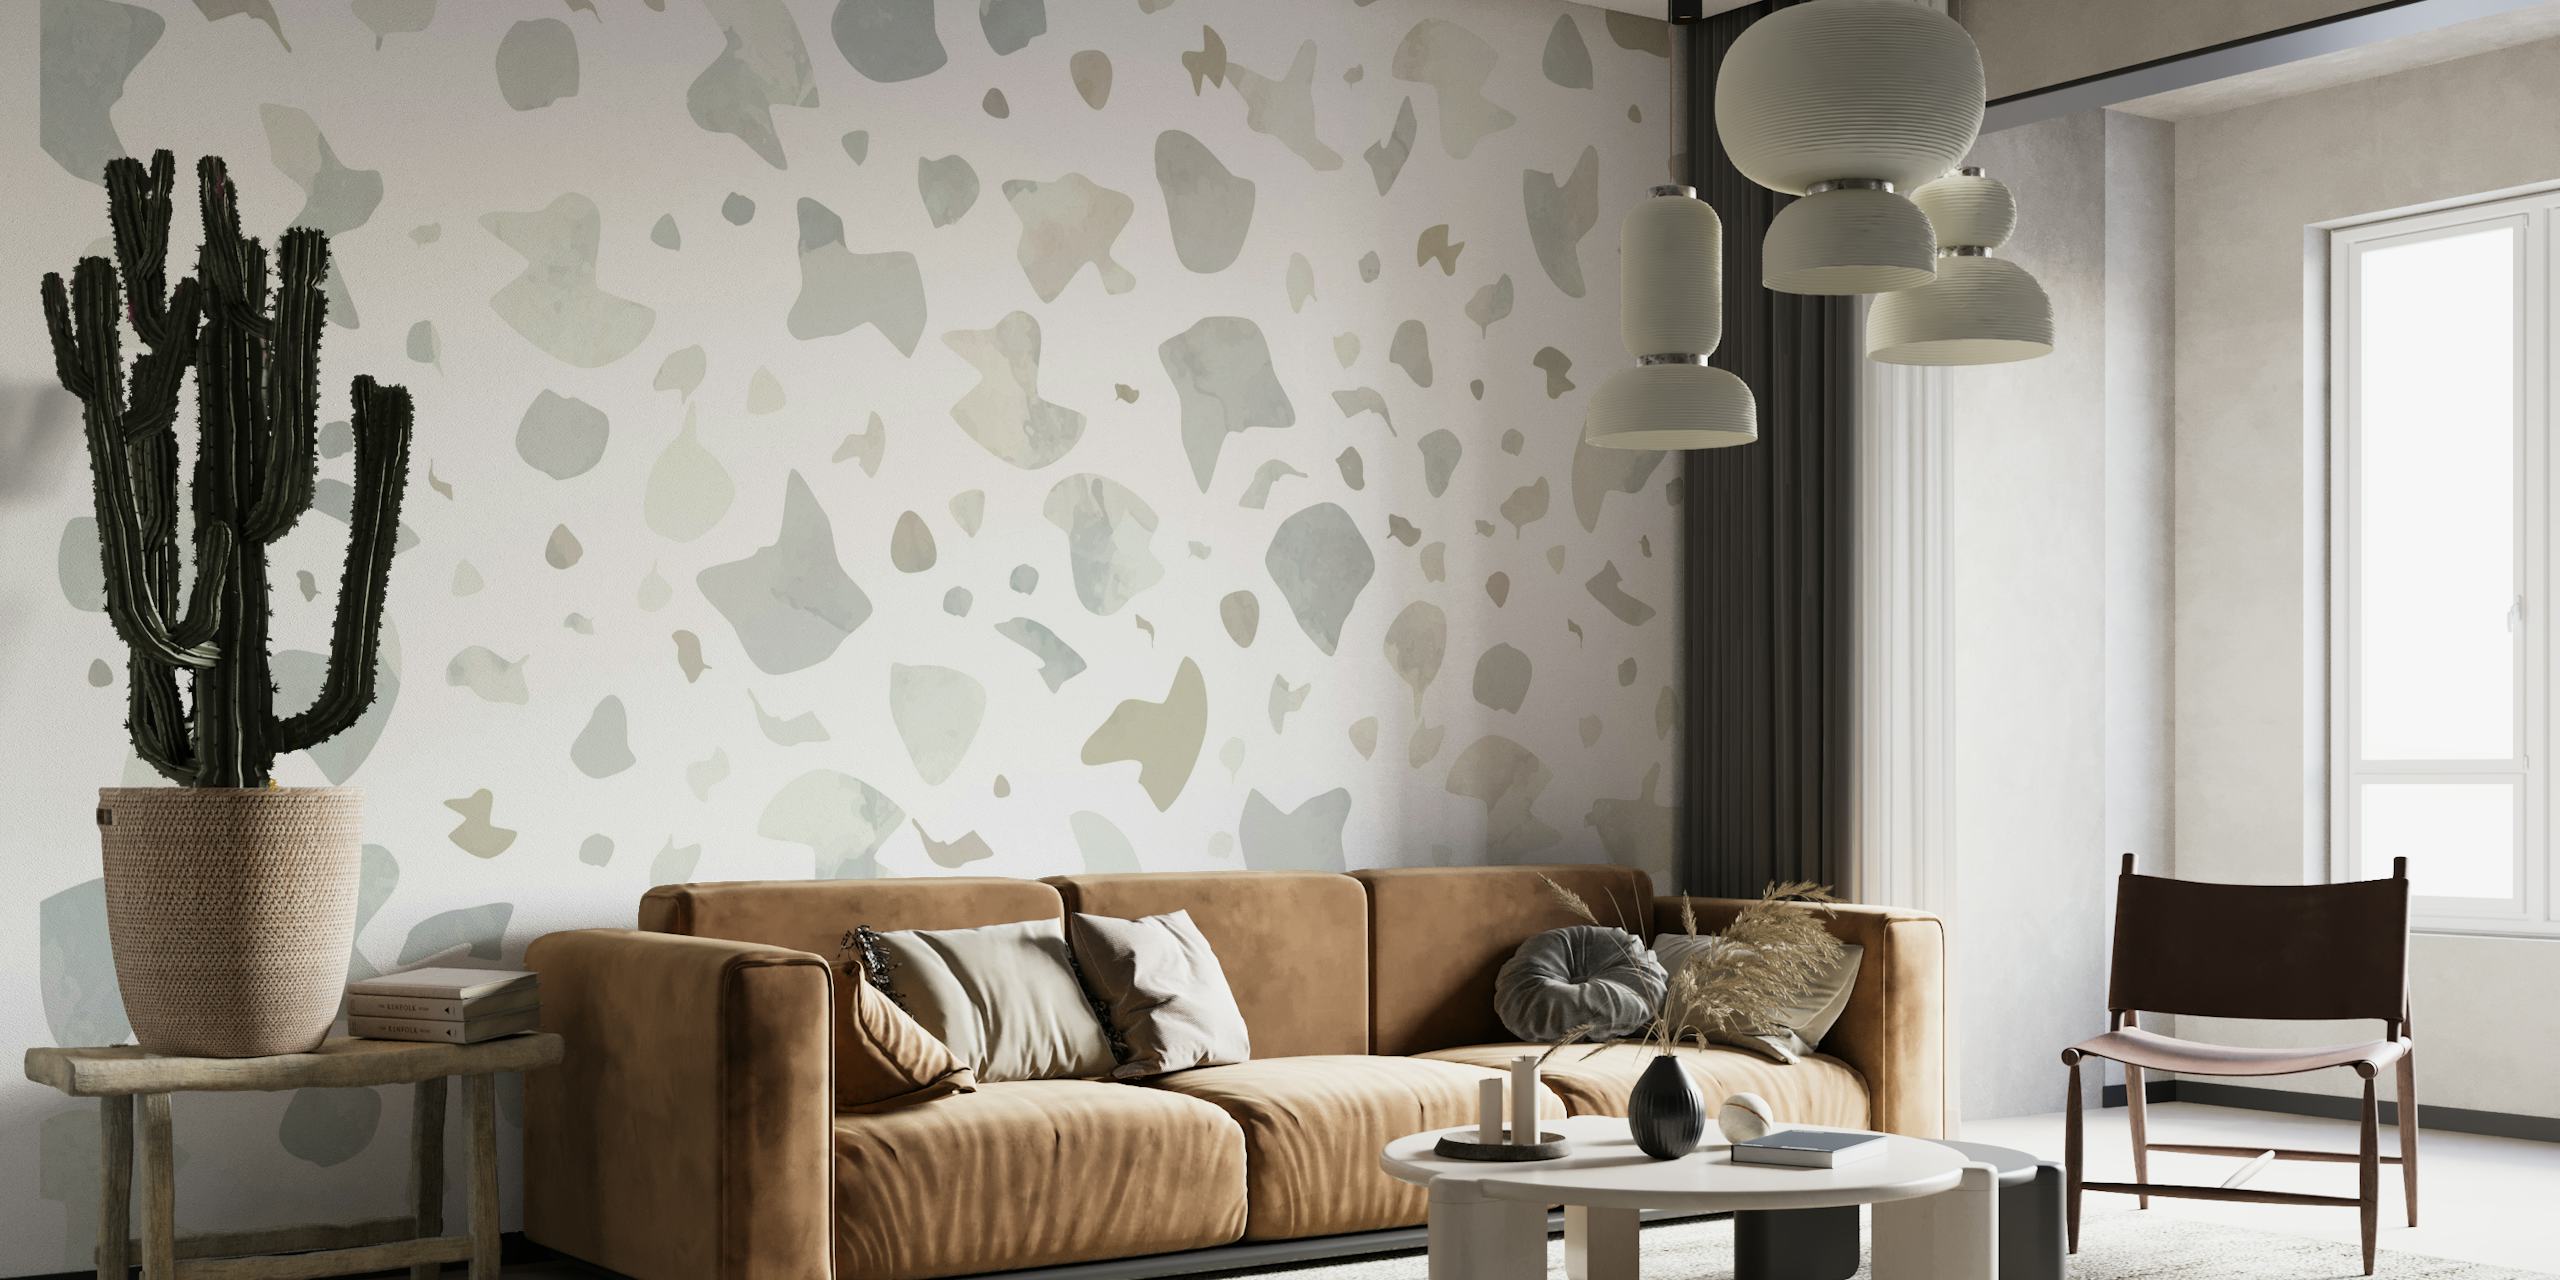 Abstract terrazzo pattern wall mural with natural stone textures in neutral tones